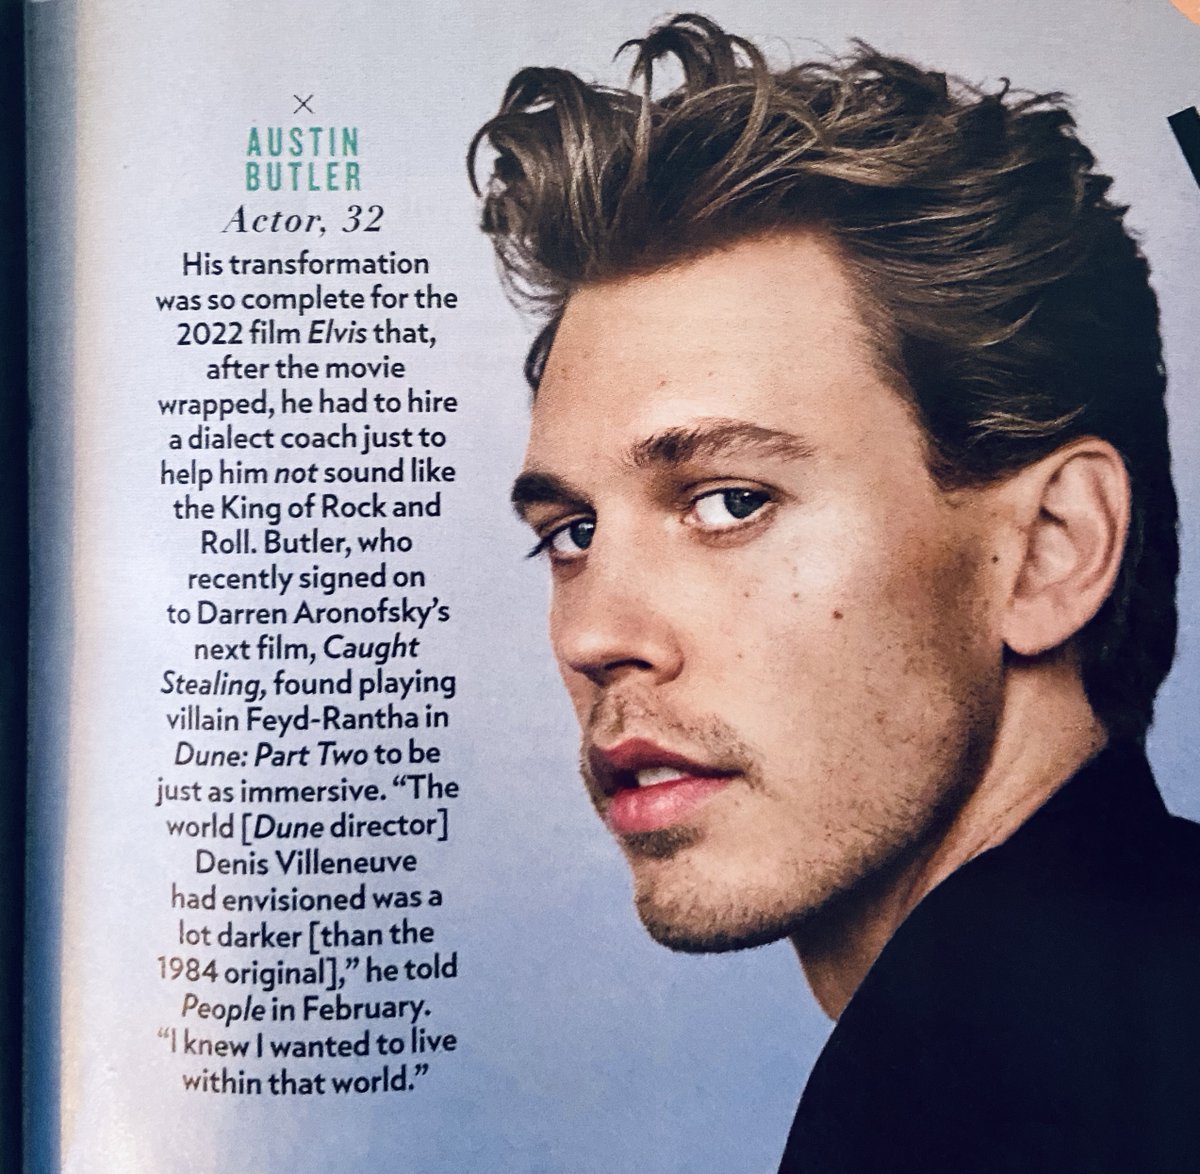 Austin Butler made it into People Magazine's 50th Anniversary issue under the 'Next Power Players' section!